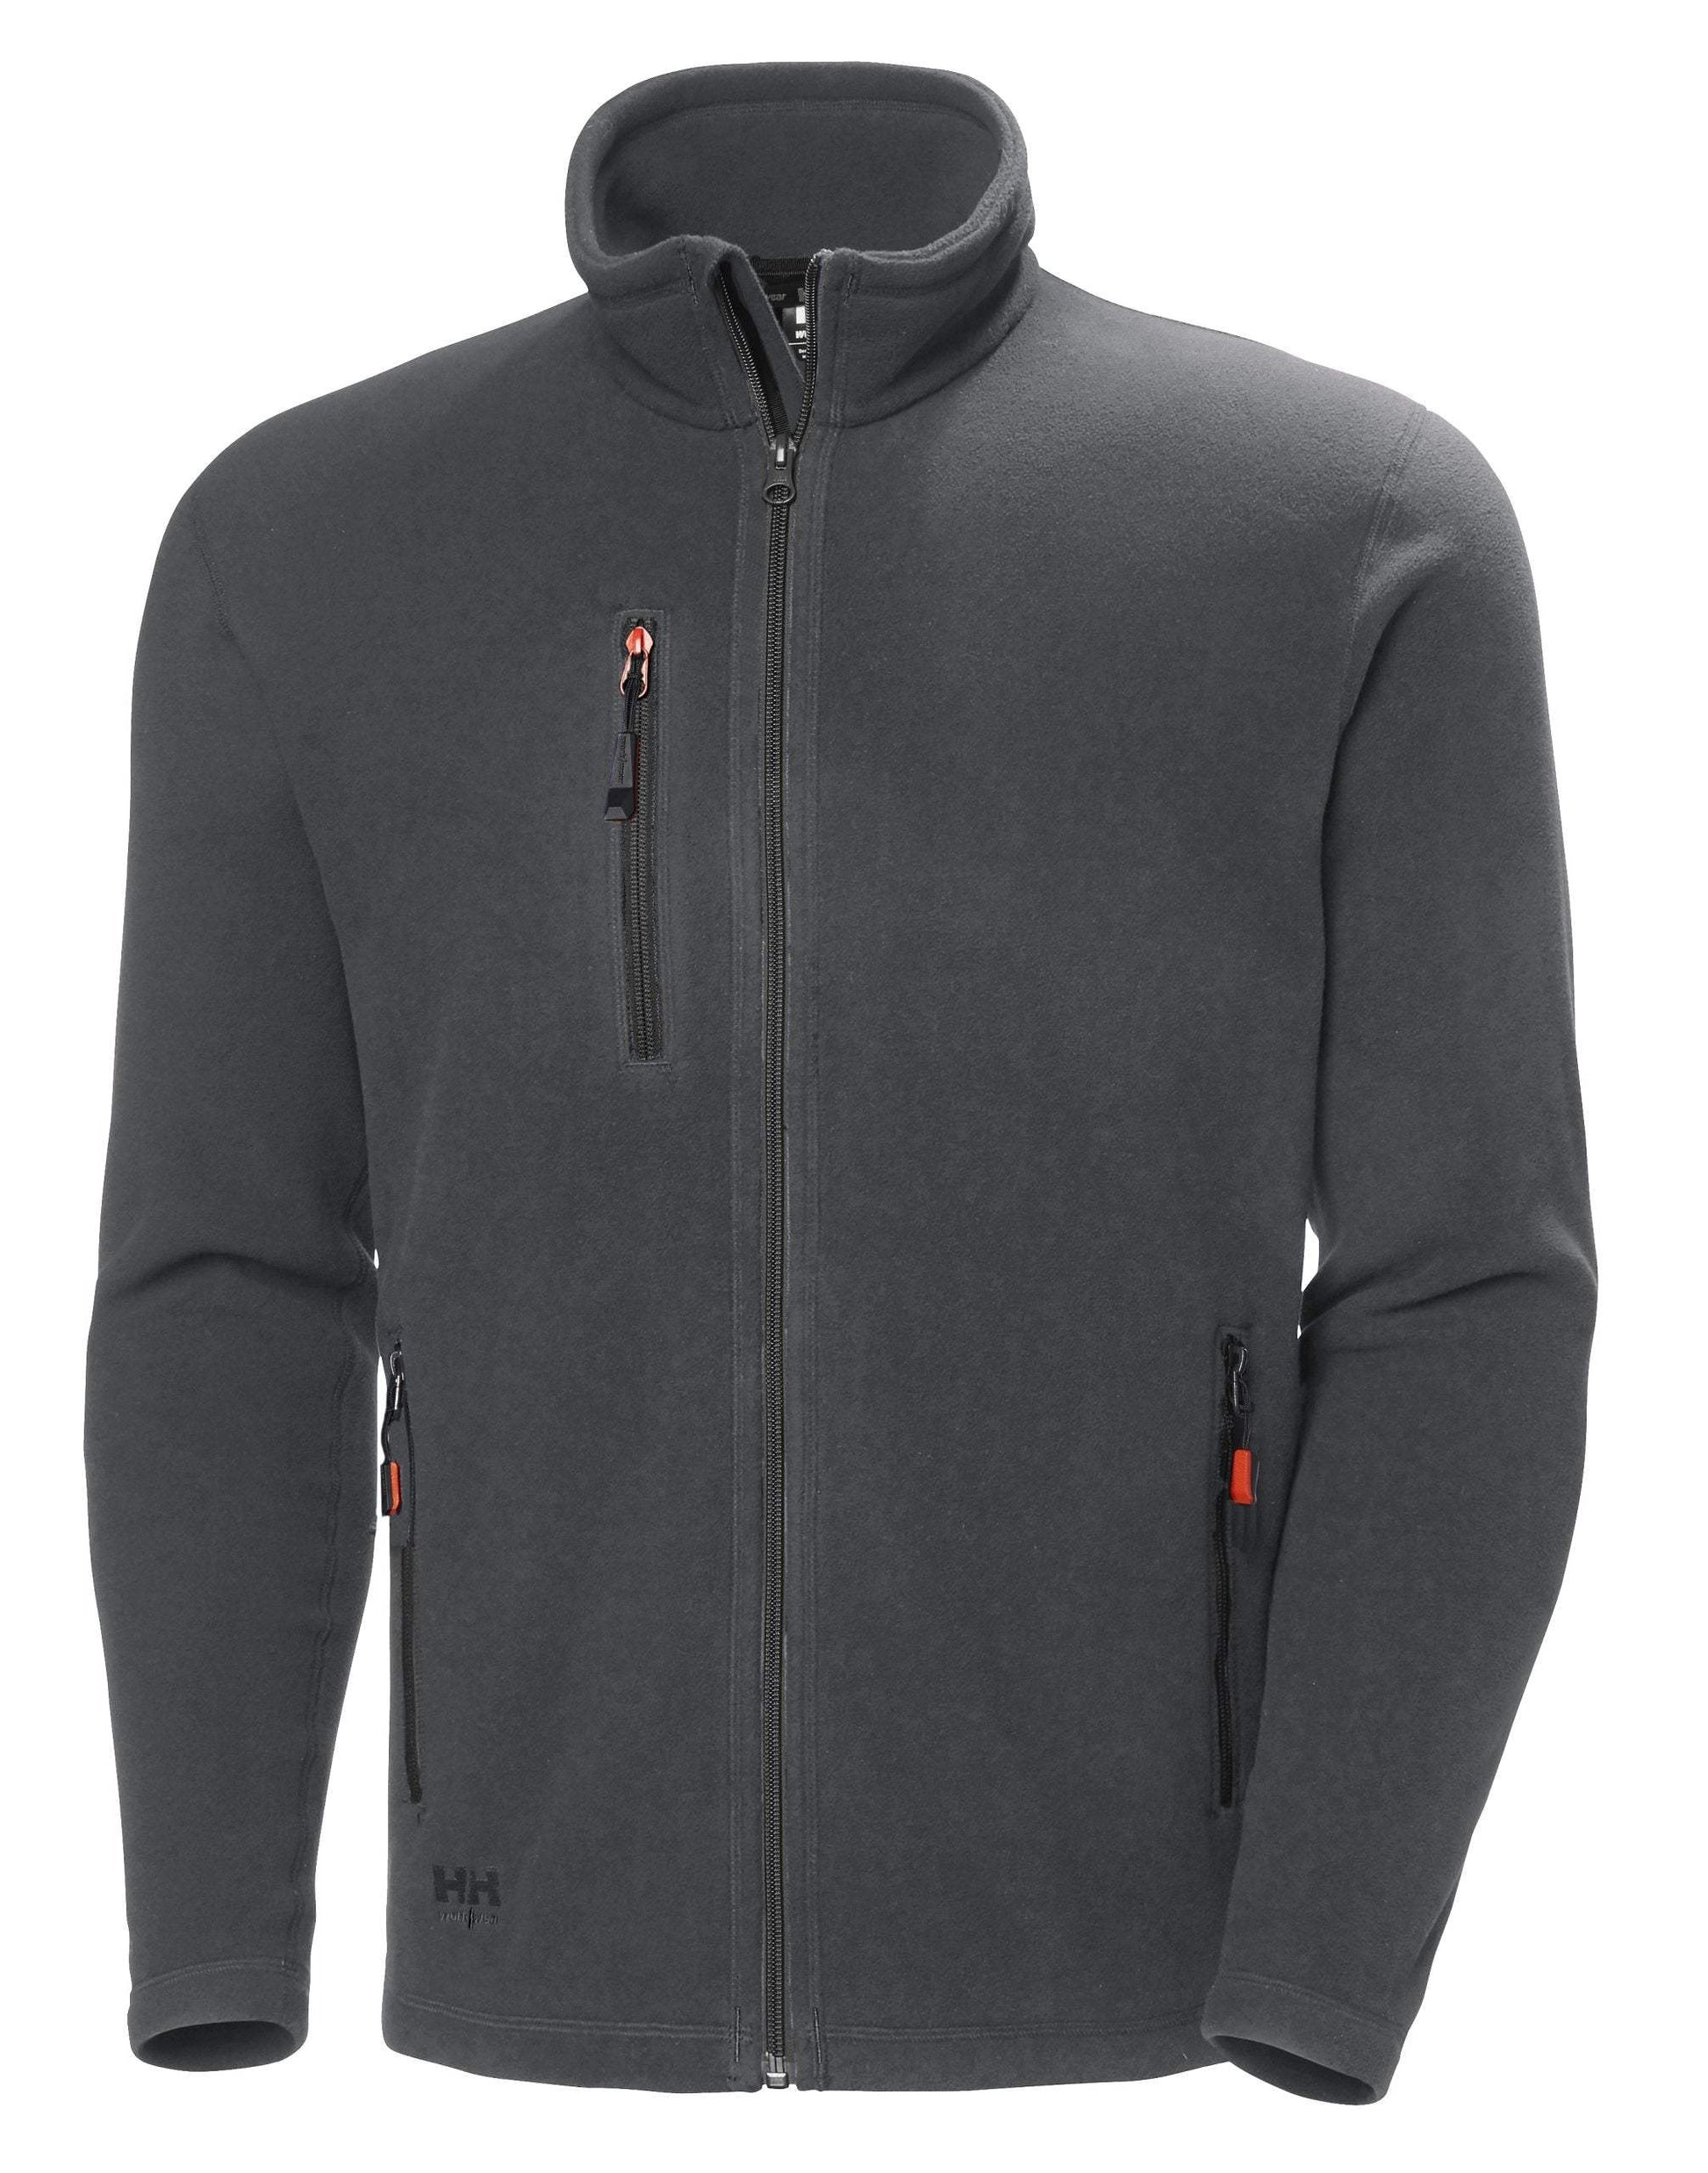 Men’s Oxford Fleece Jacket by Helly Hansen - The Luxury Promotional Gifts Company Limited